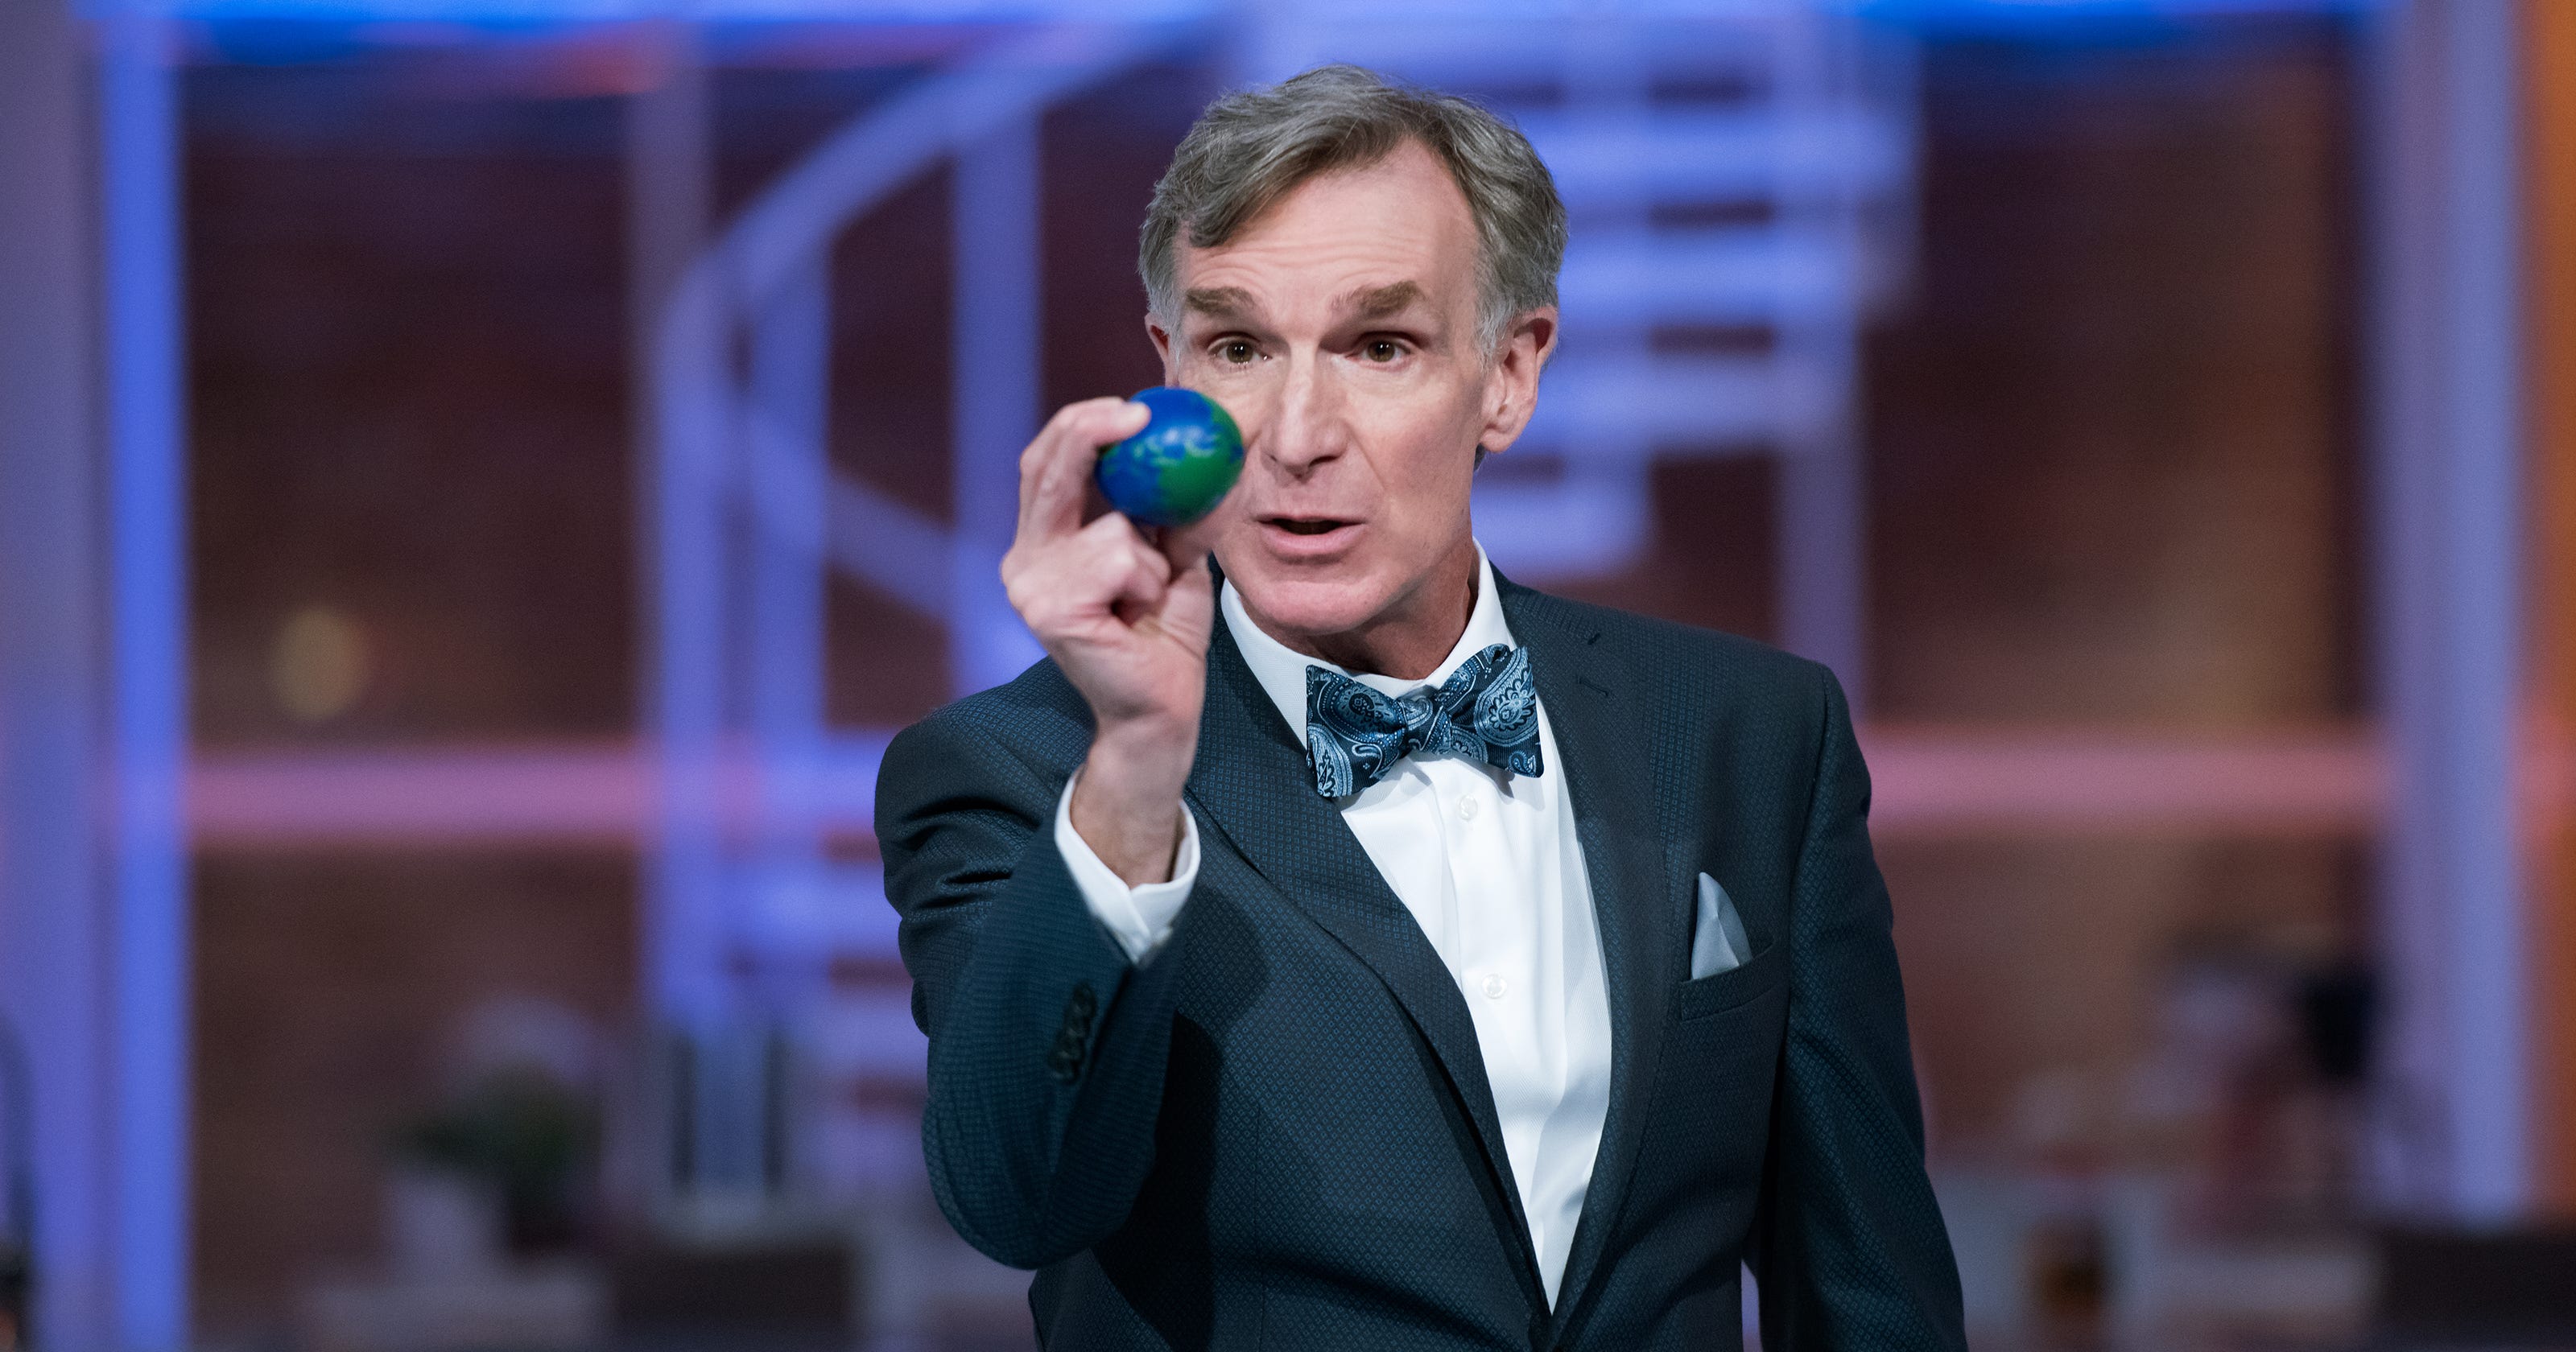 Bill Nye The Science Guy Is Back To Save The World From Science Deniers